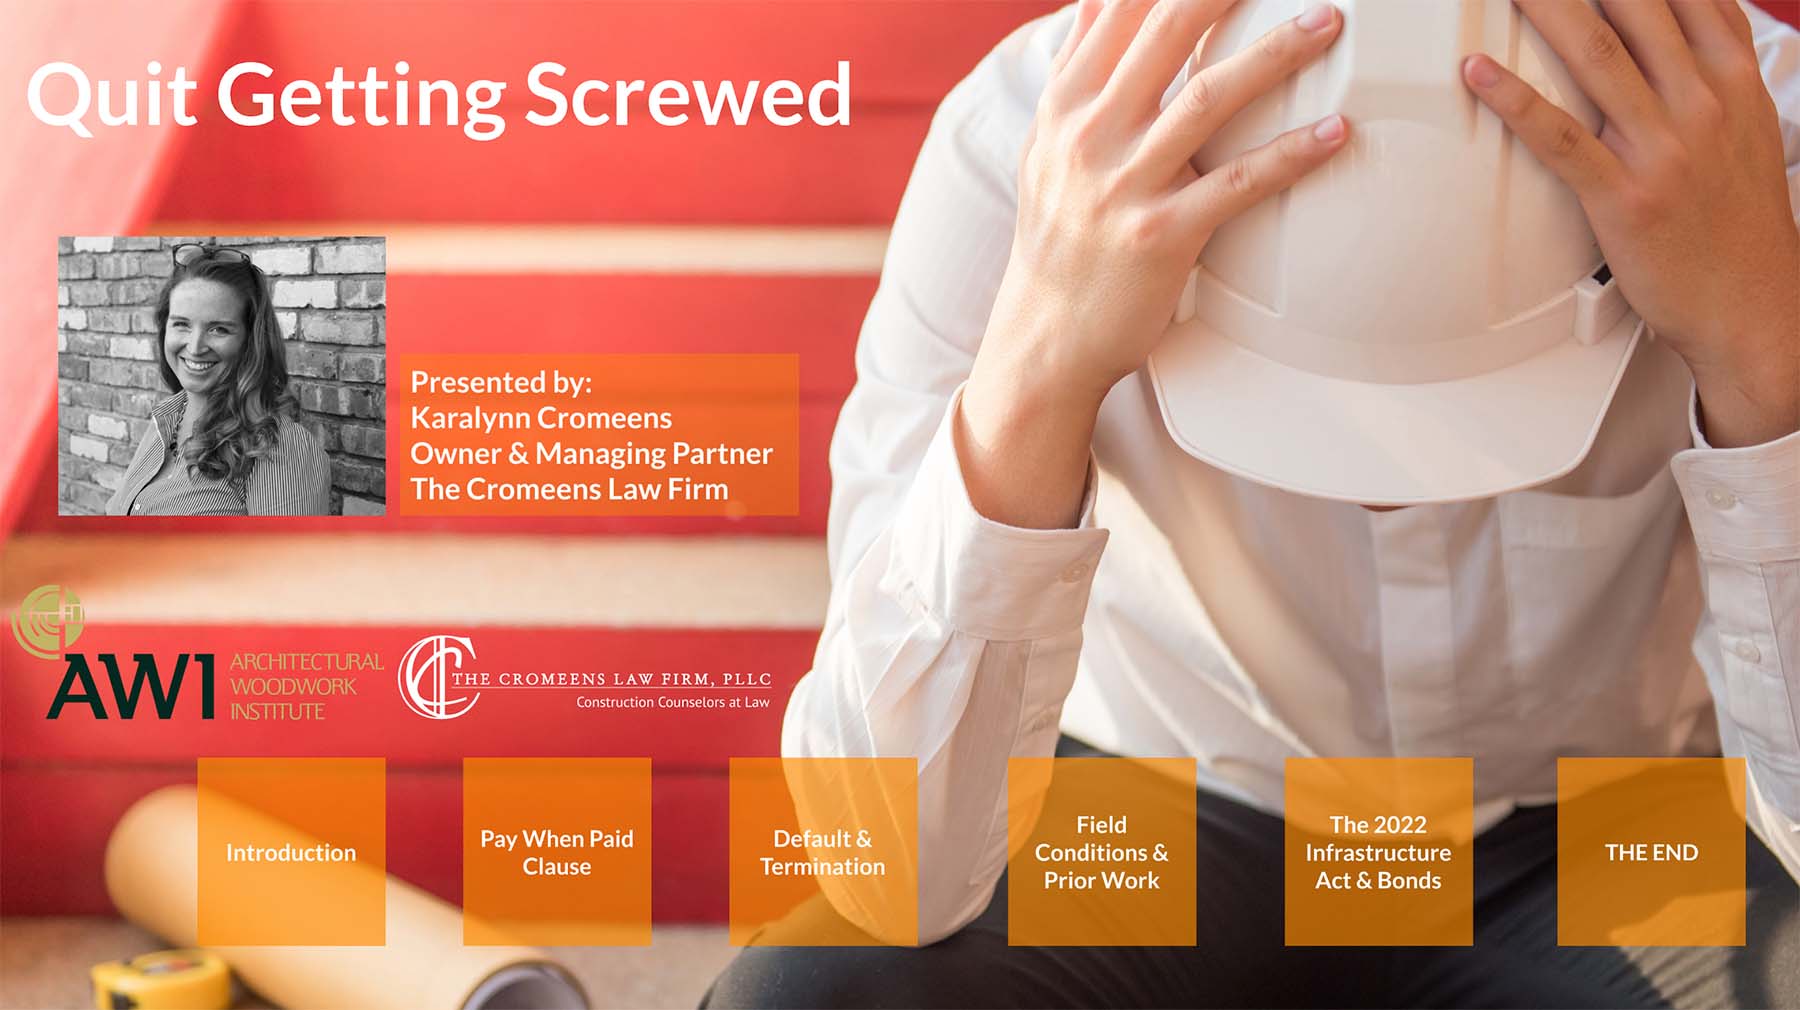 Quit Getting Screwed Presentation with the Architectural Woodwork Institute – August 19th